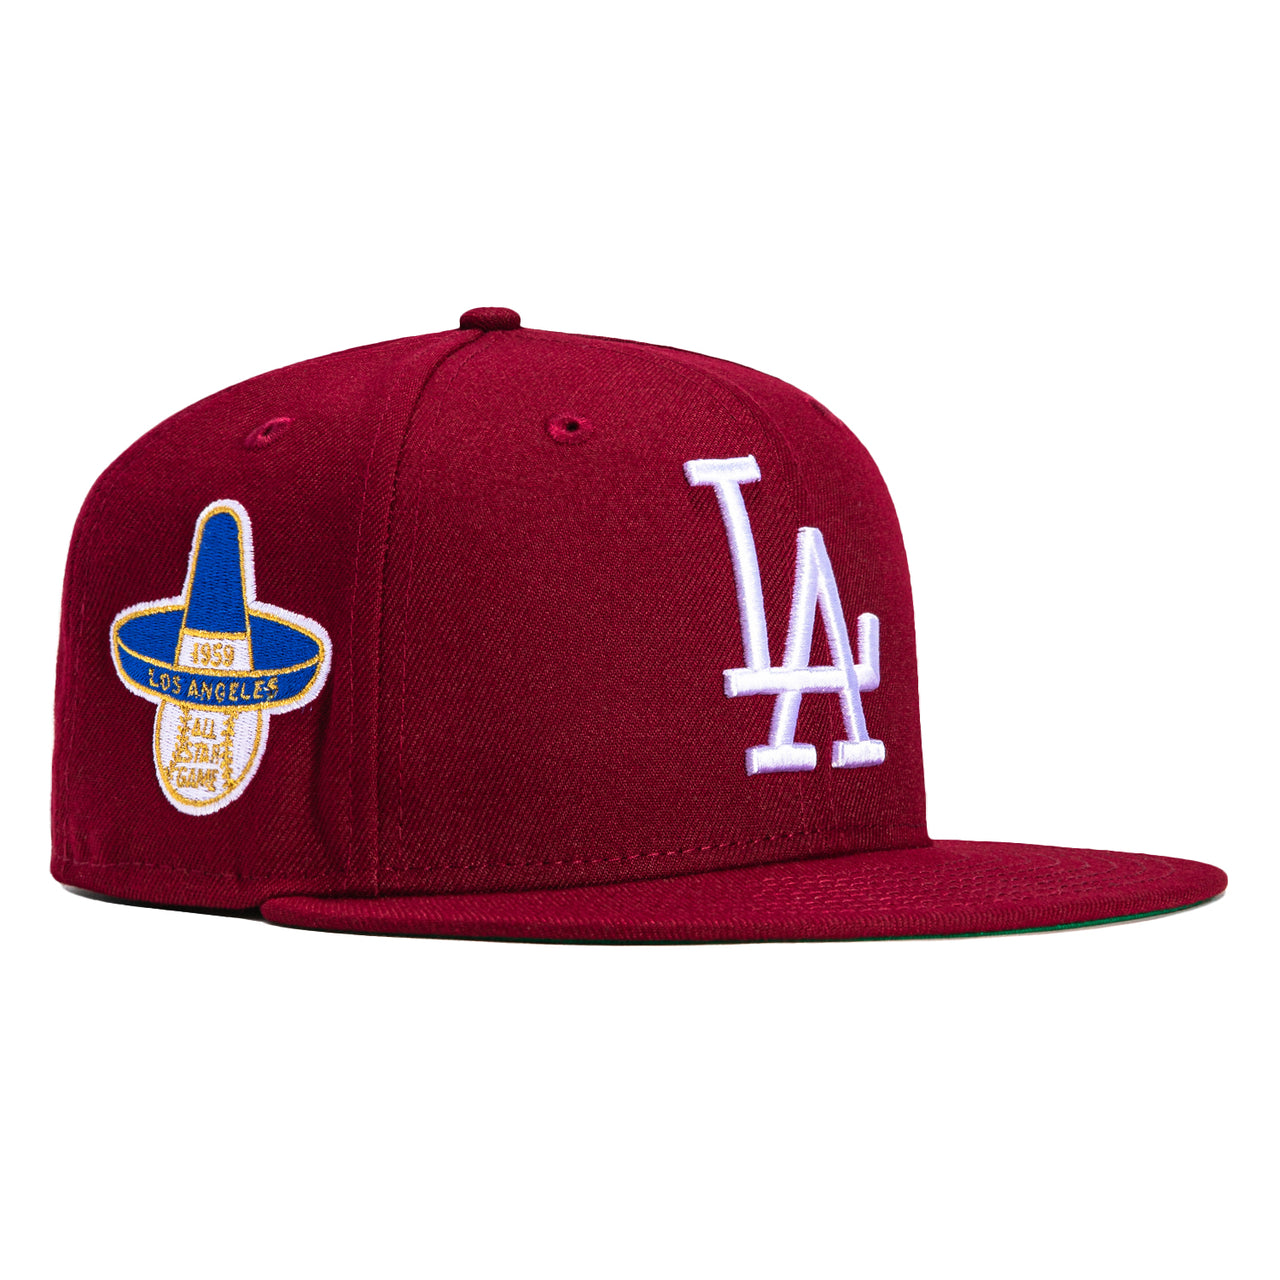 New Era 59Fifty Los Angeles Dodgers 1959 All Star Game Patch Hat - Car ...